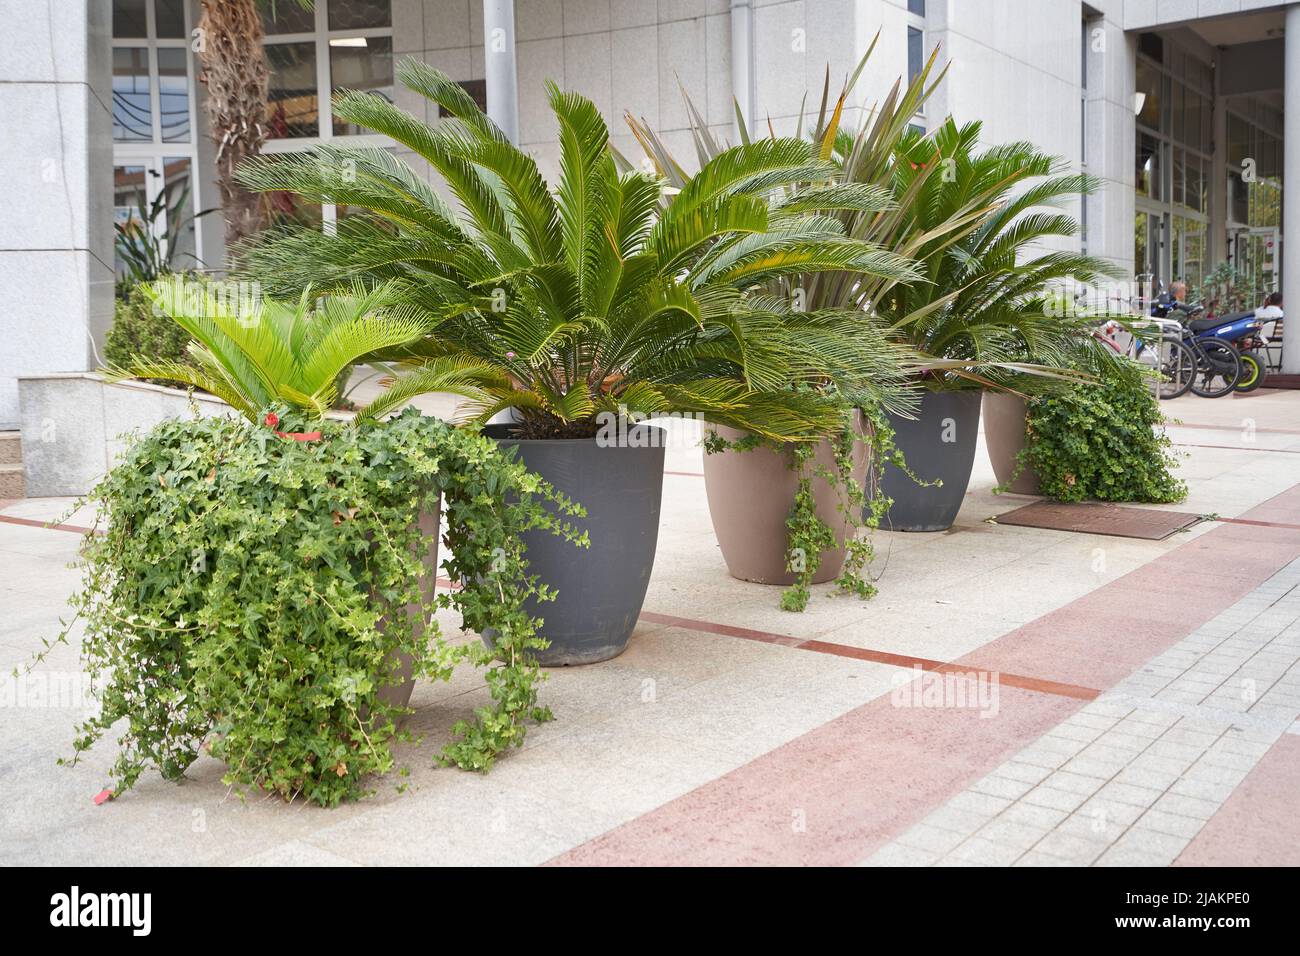 Cycas palm trees In large pots at the front of the building for landscaping Stock Photo